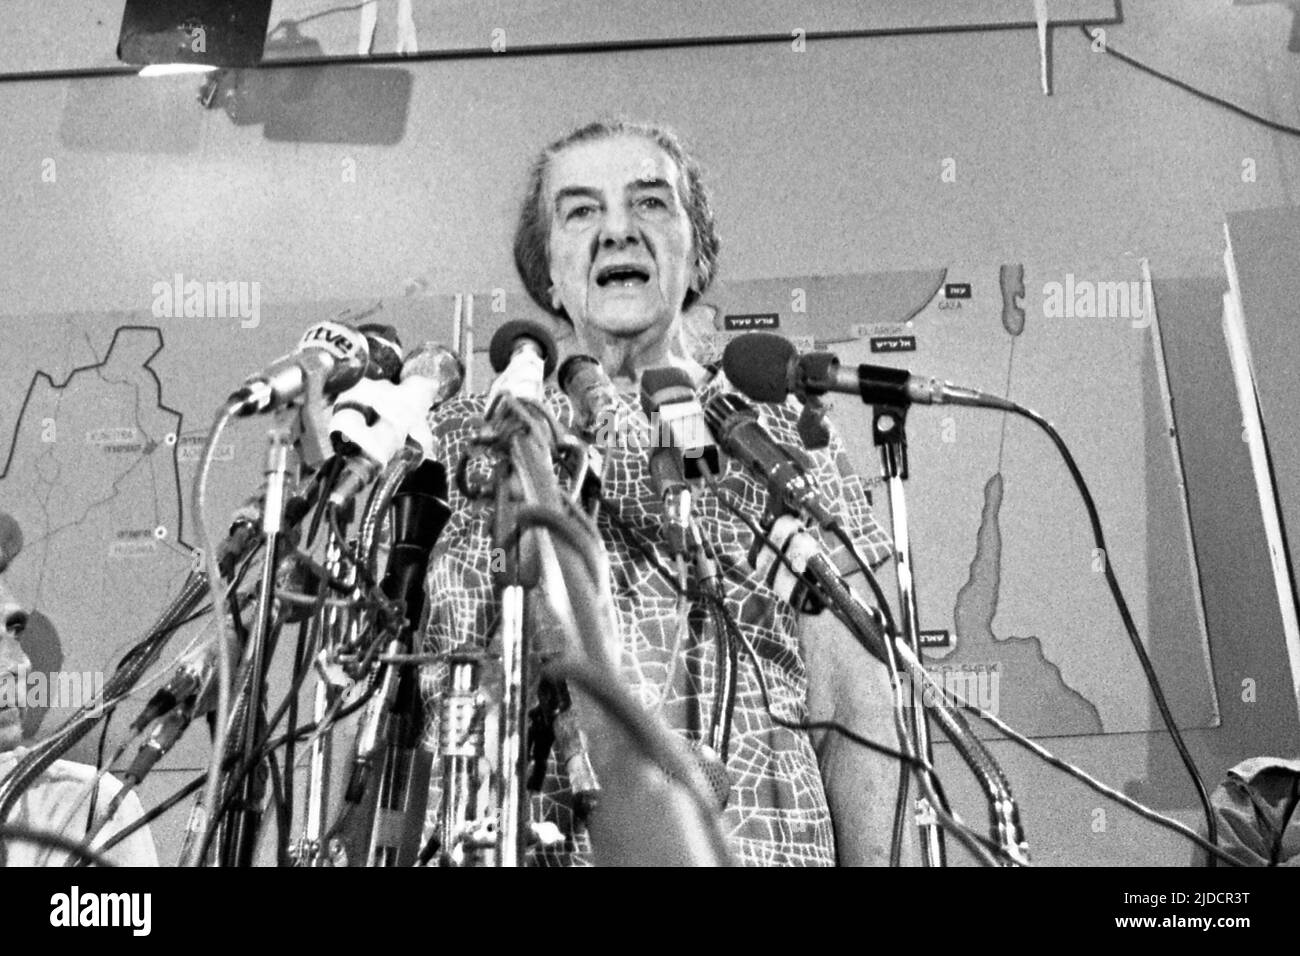 Golda MEIR, Israeli Prime Minister, politician, at a press conference, portrait, portrait, cropped single image, single motif, stands at a lectern with microphones, during the Yom Kippur War, the Yom Kippur War between Israel and the Arab States of Egypt, Jordan and Syria lasted from October 6 to October 25, 1973, Stock Photo